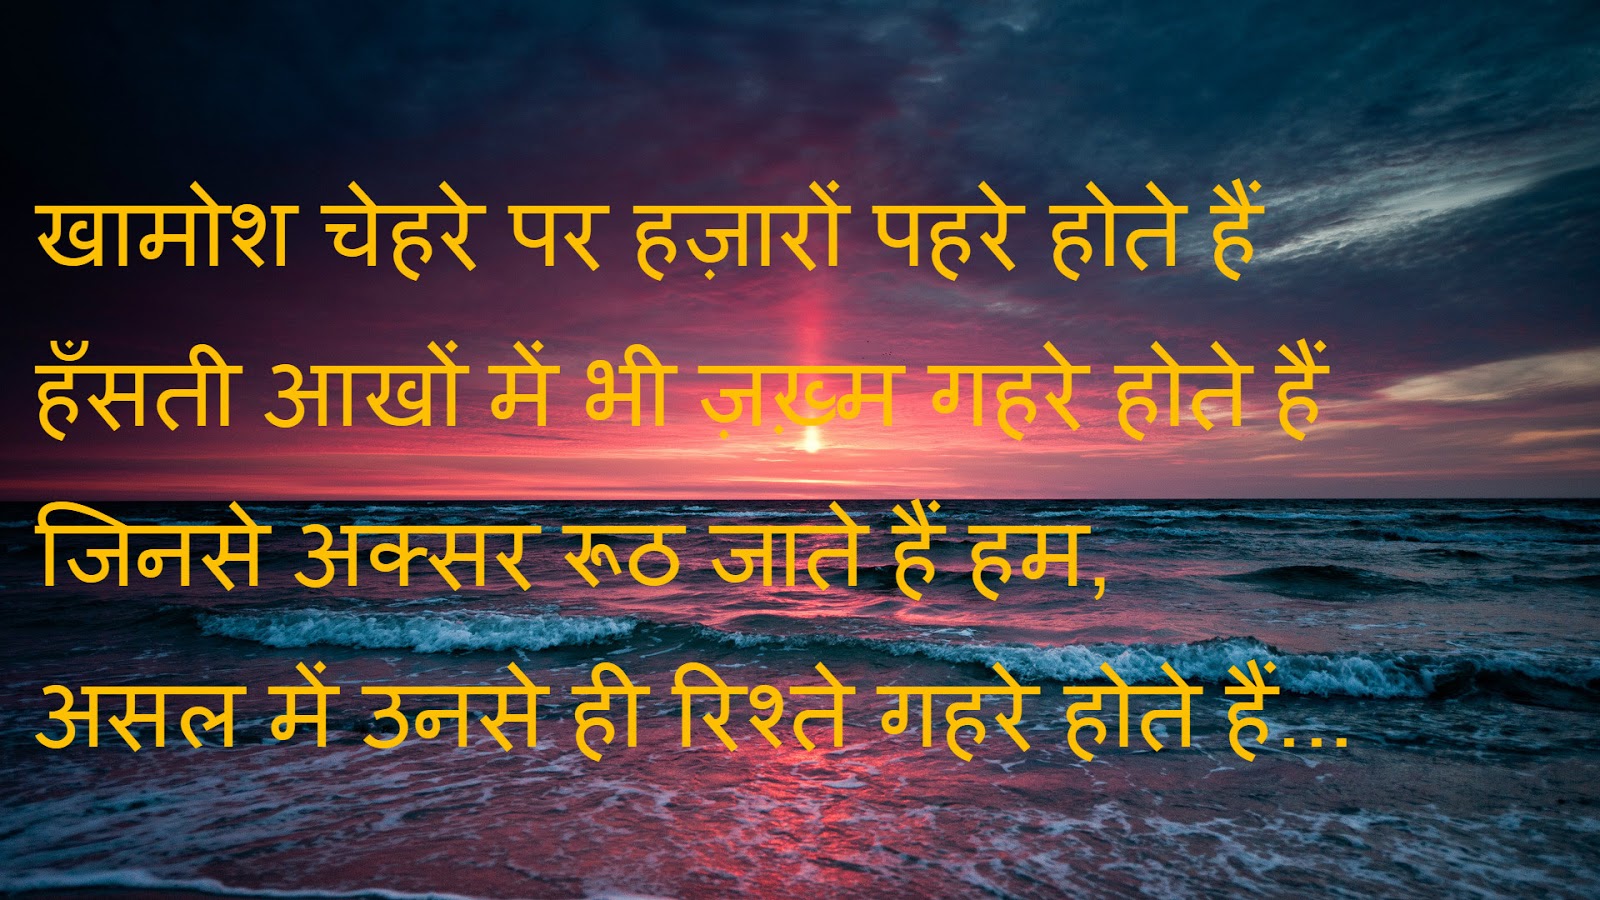 Life quotes images shayari in